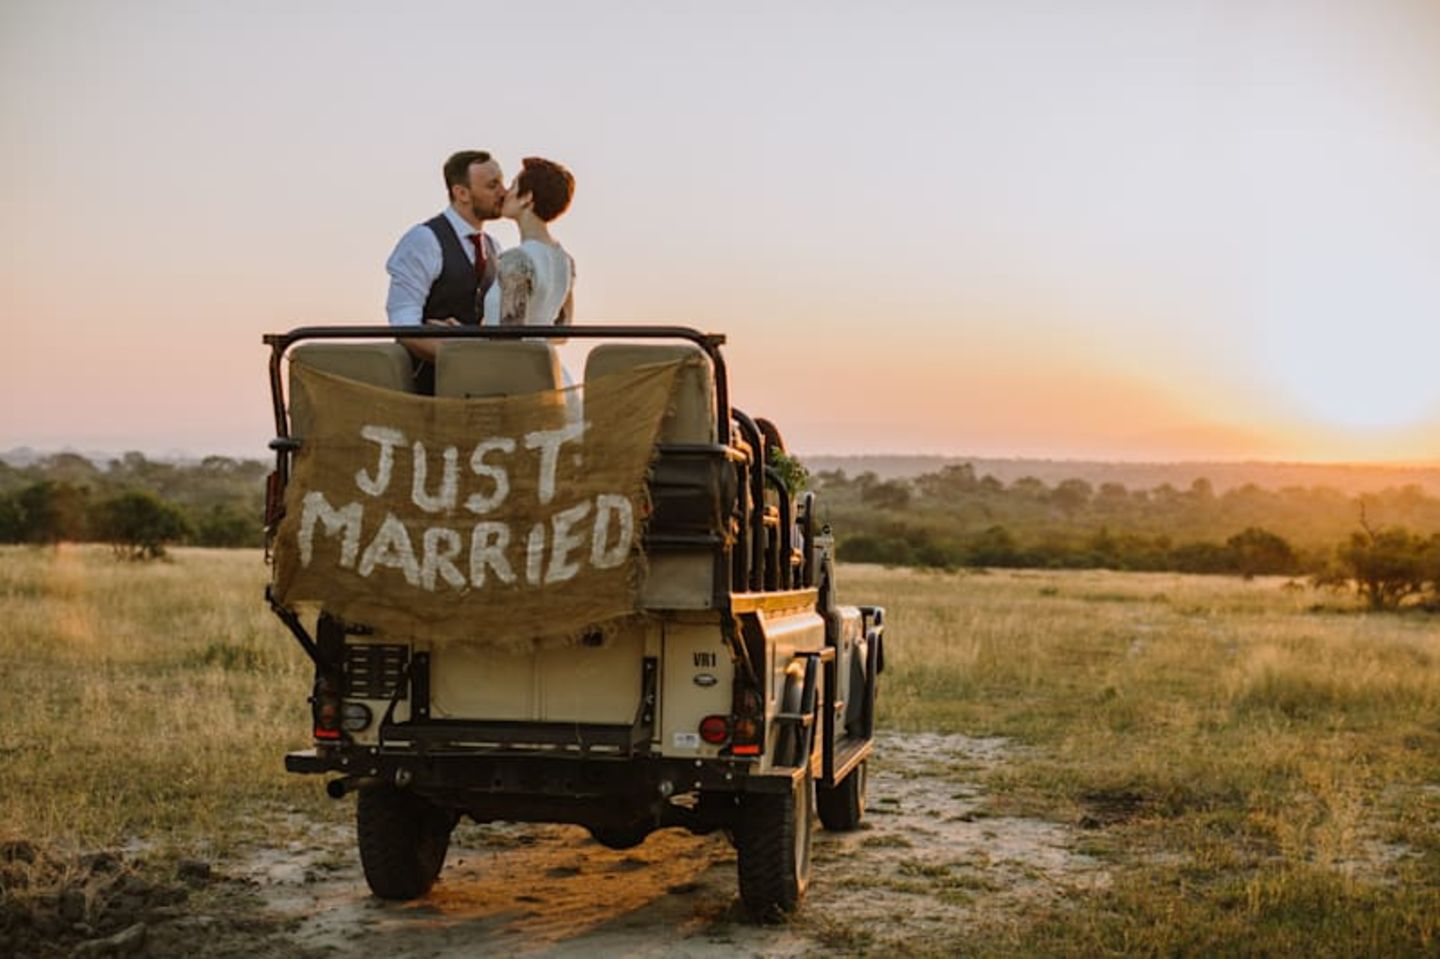 A couple kiss in a safari jeep with a Just Married sign on the back of it